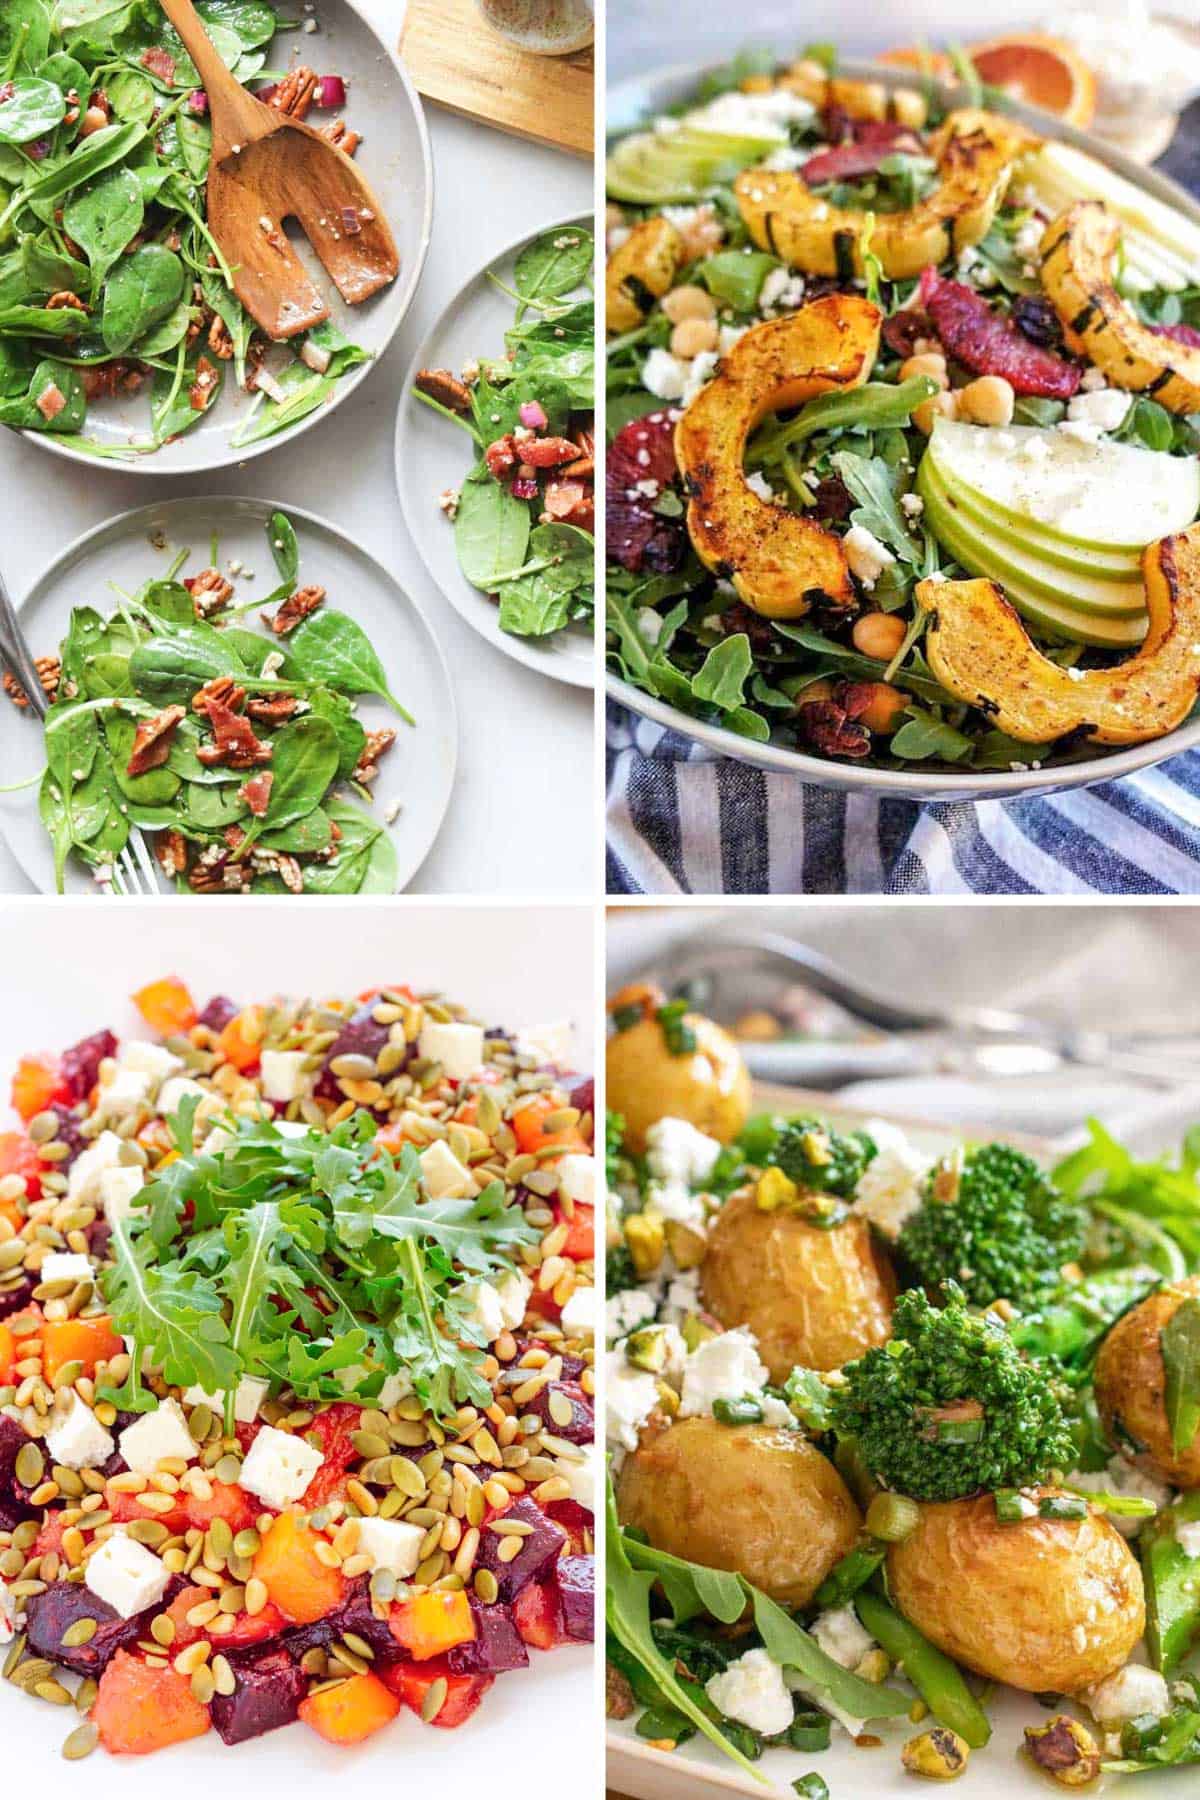 A collage of four plates of fall salads, each with various greens, vegetables, and toppings, including nuts, cheese, potatoes, and grilled squash.